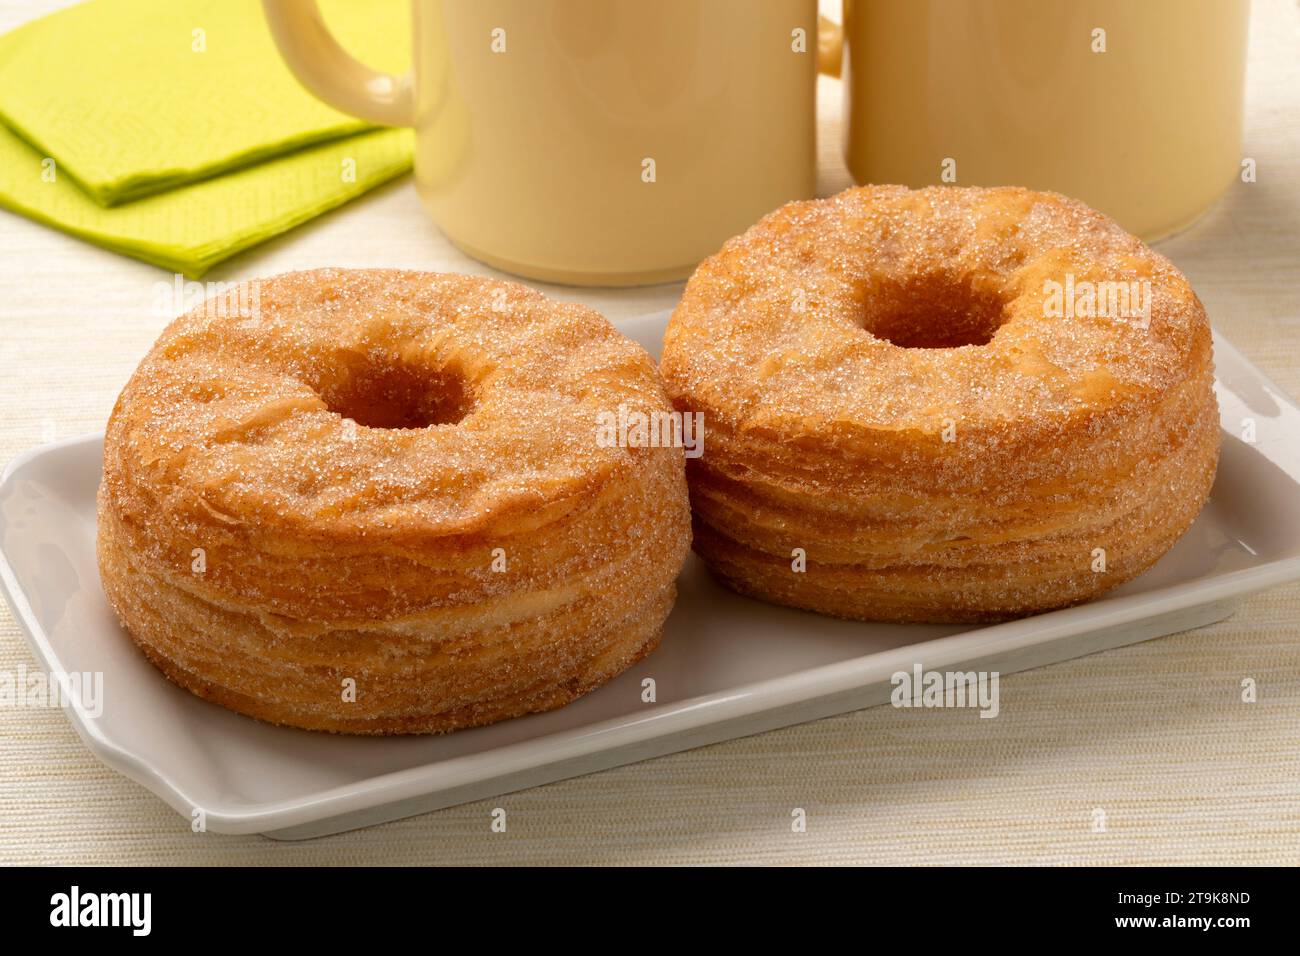 Plate with a pair of tasty sweet Cronuts close up Stock Photo